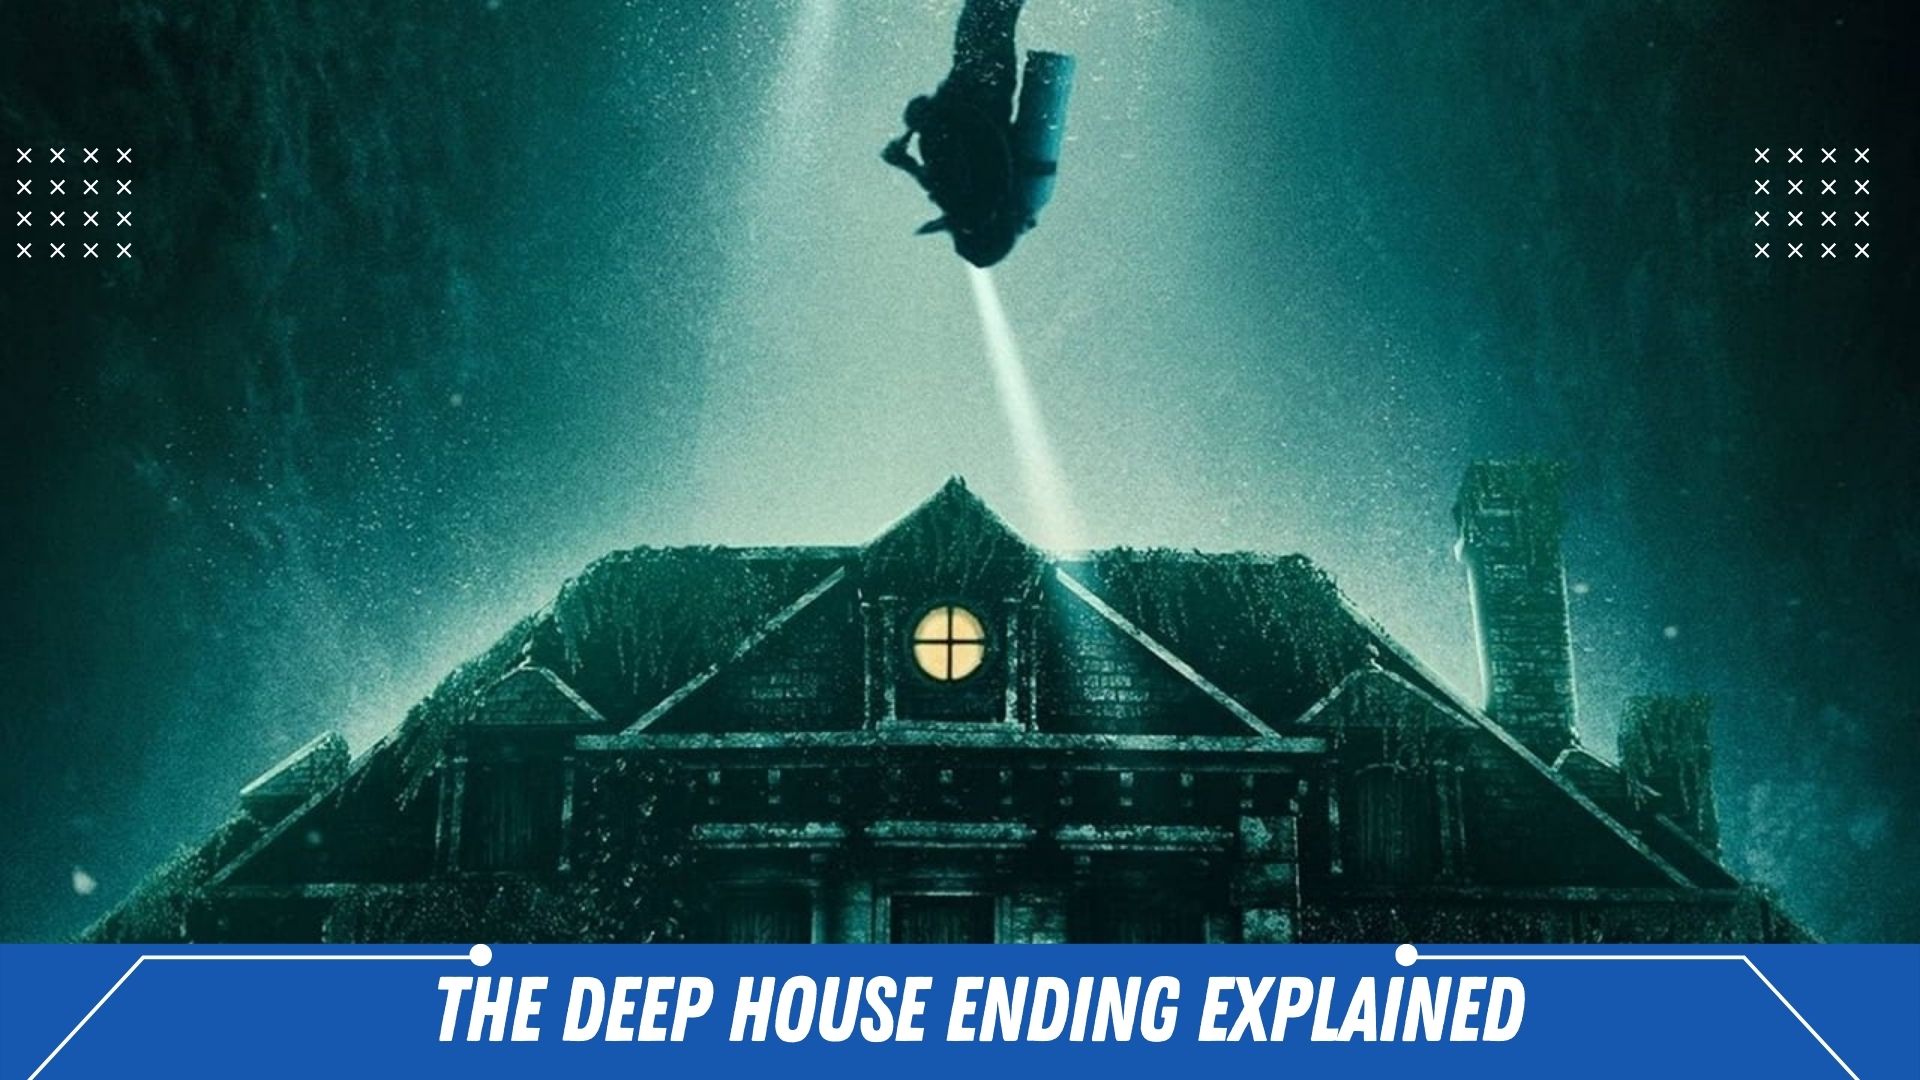 The Deep House Ending Explained